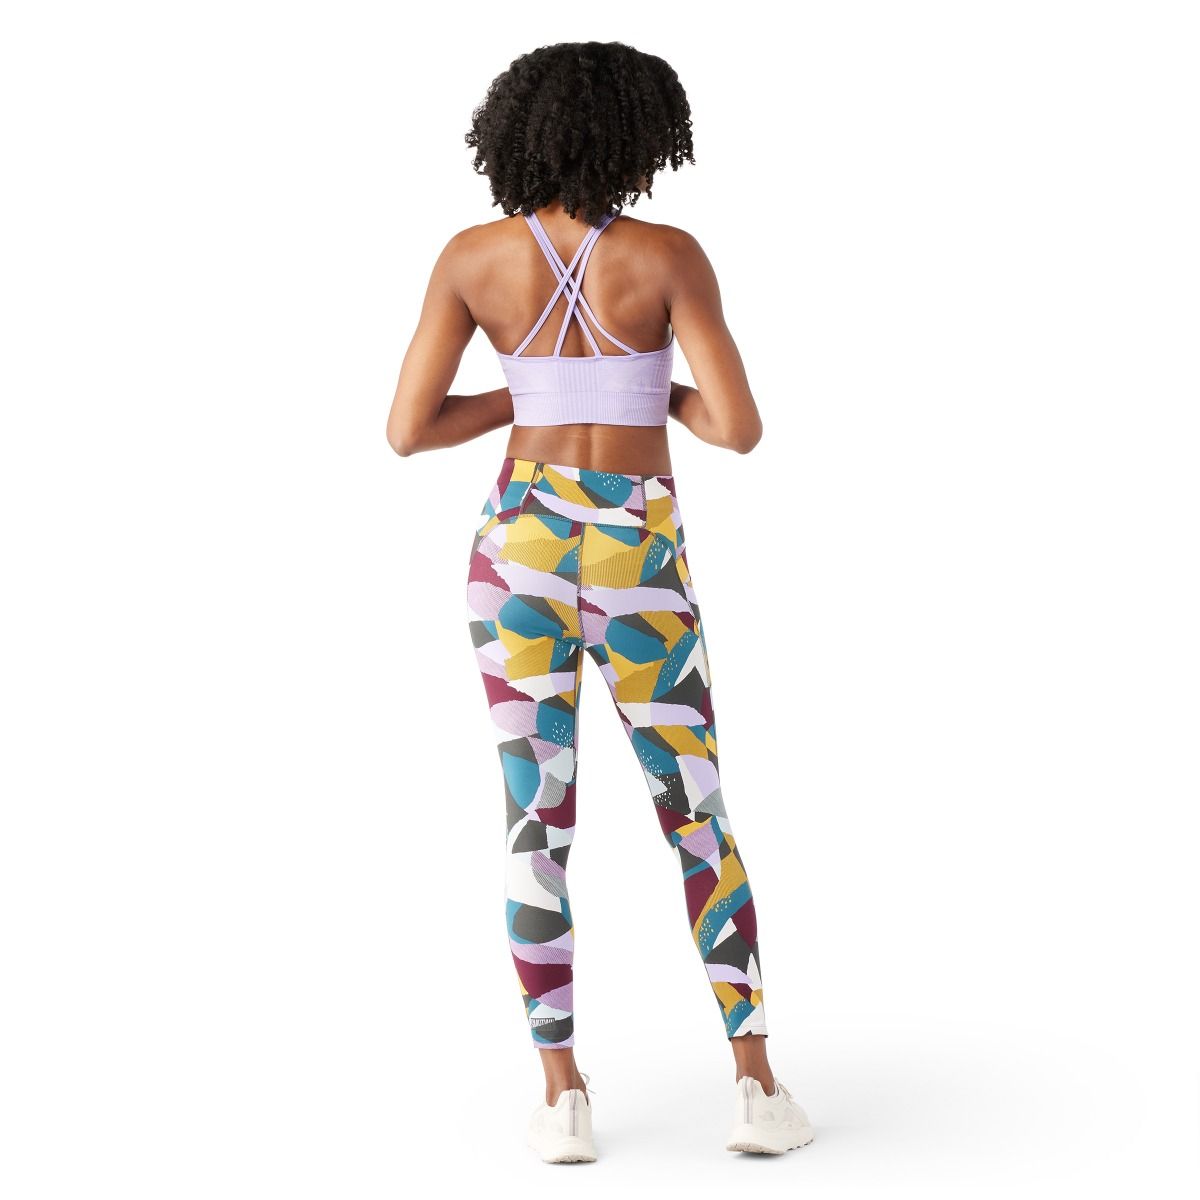 Smartwool Active Crop Bra, FREE SHIPPING in Canada